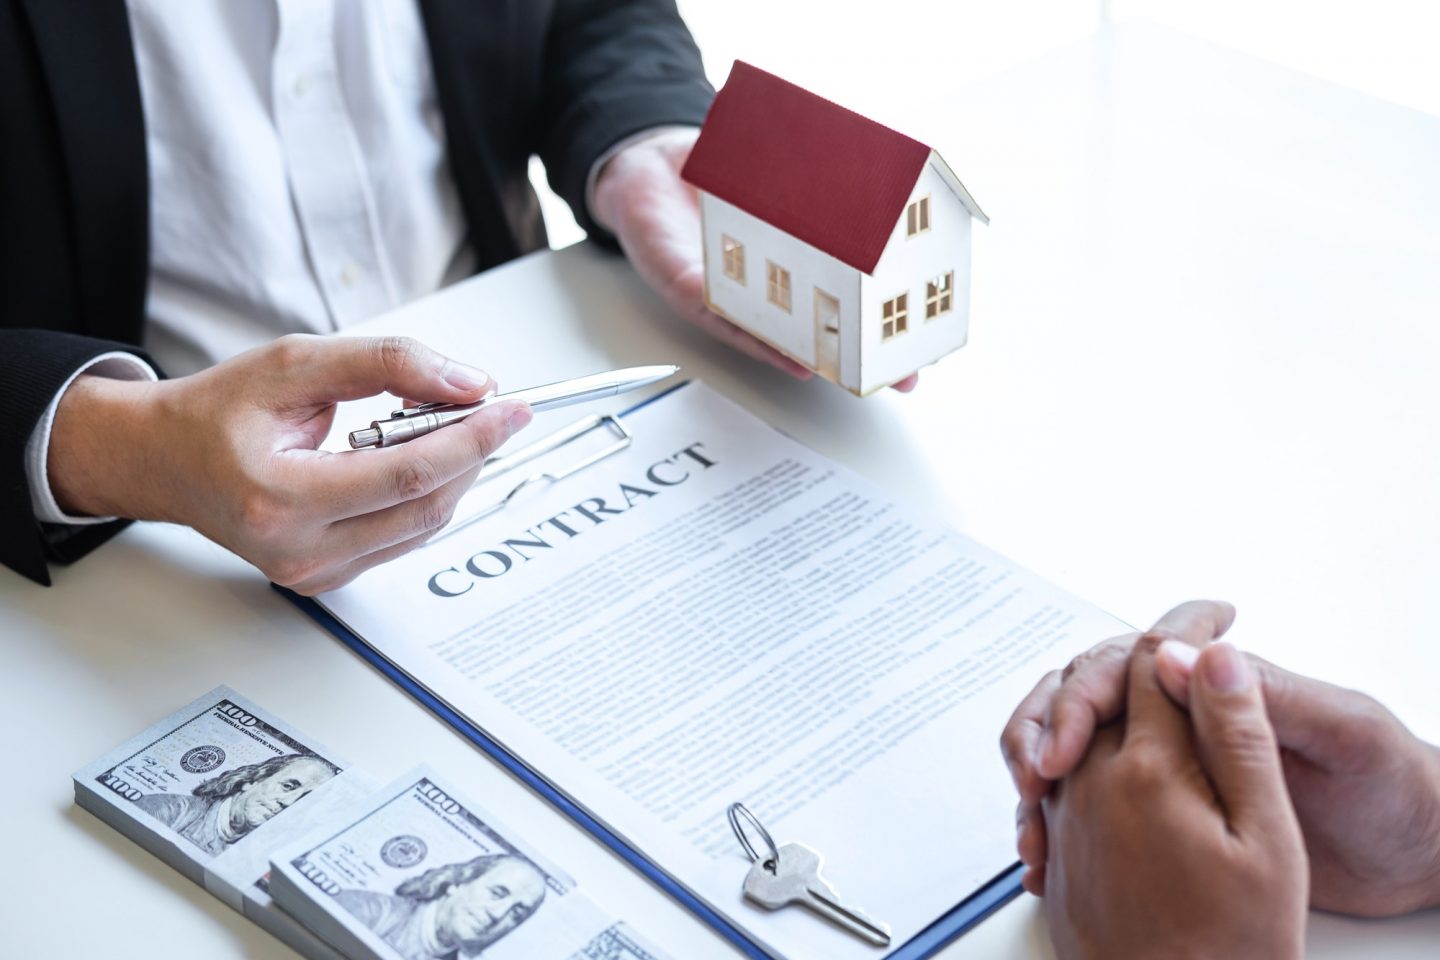 Estate agent broker reach contract form and presentation to client signing agreement contract real